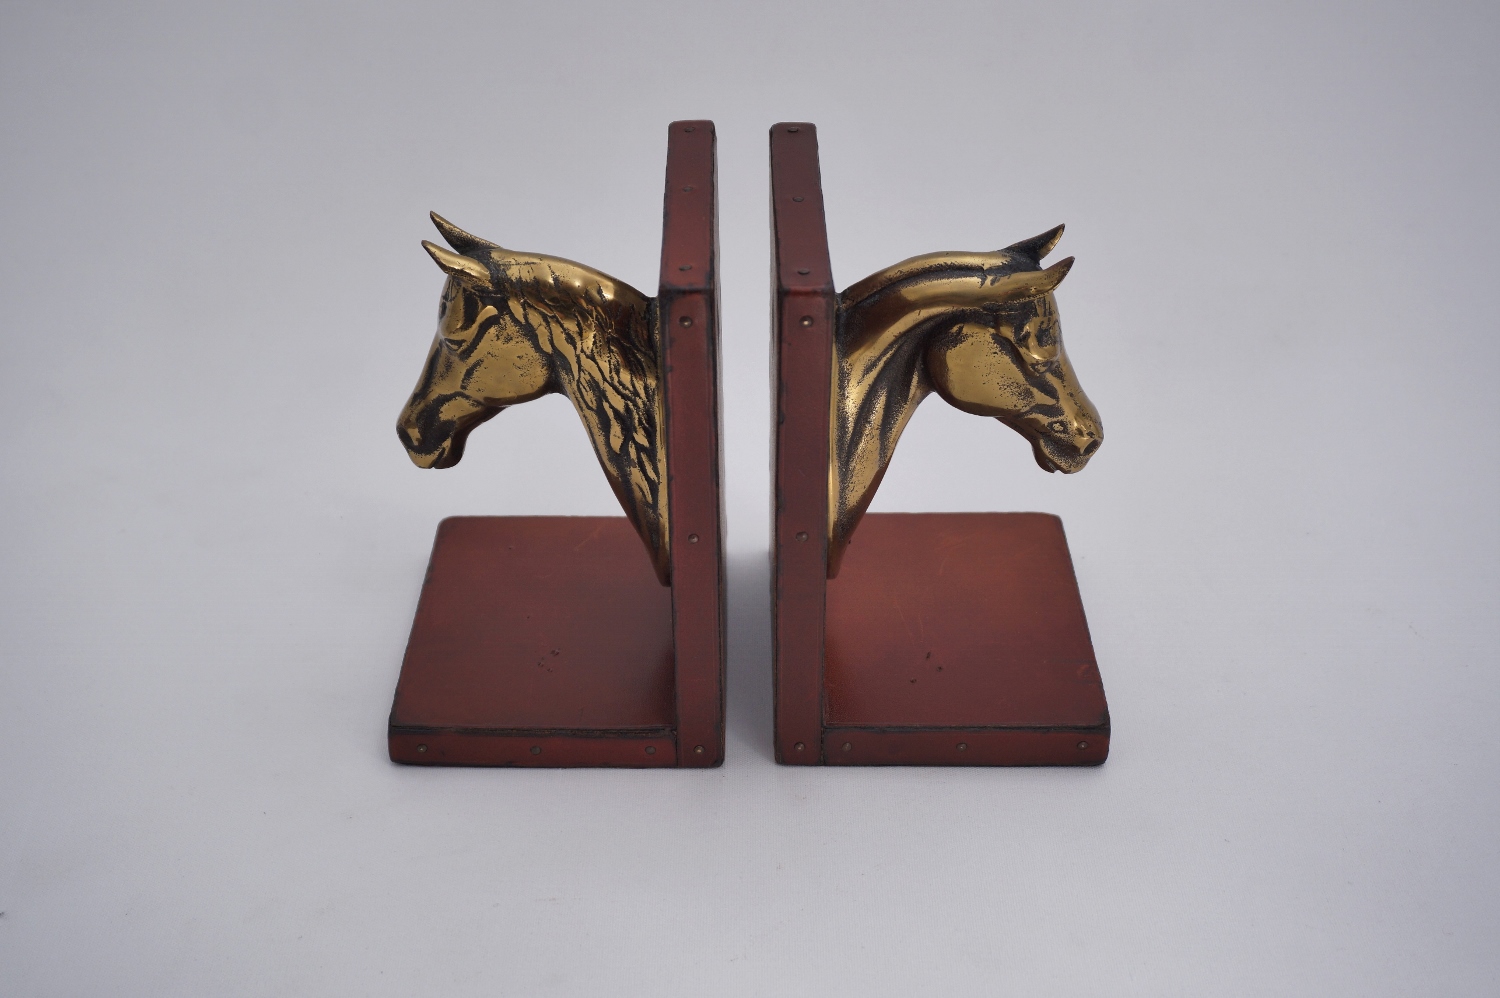 Vintage horse bookends, Maison Charles style, brass & leather 